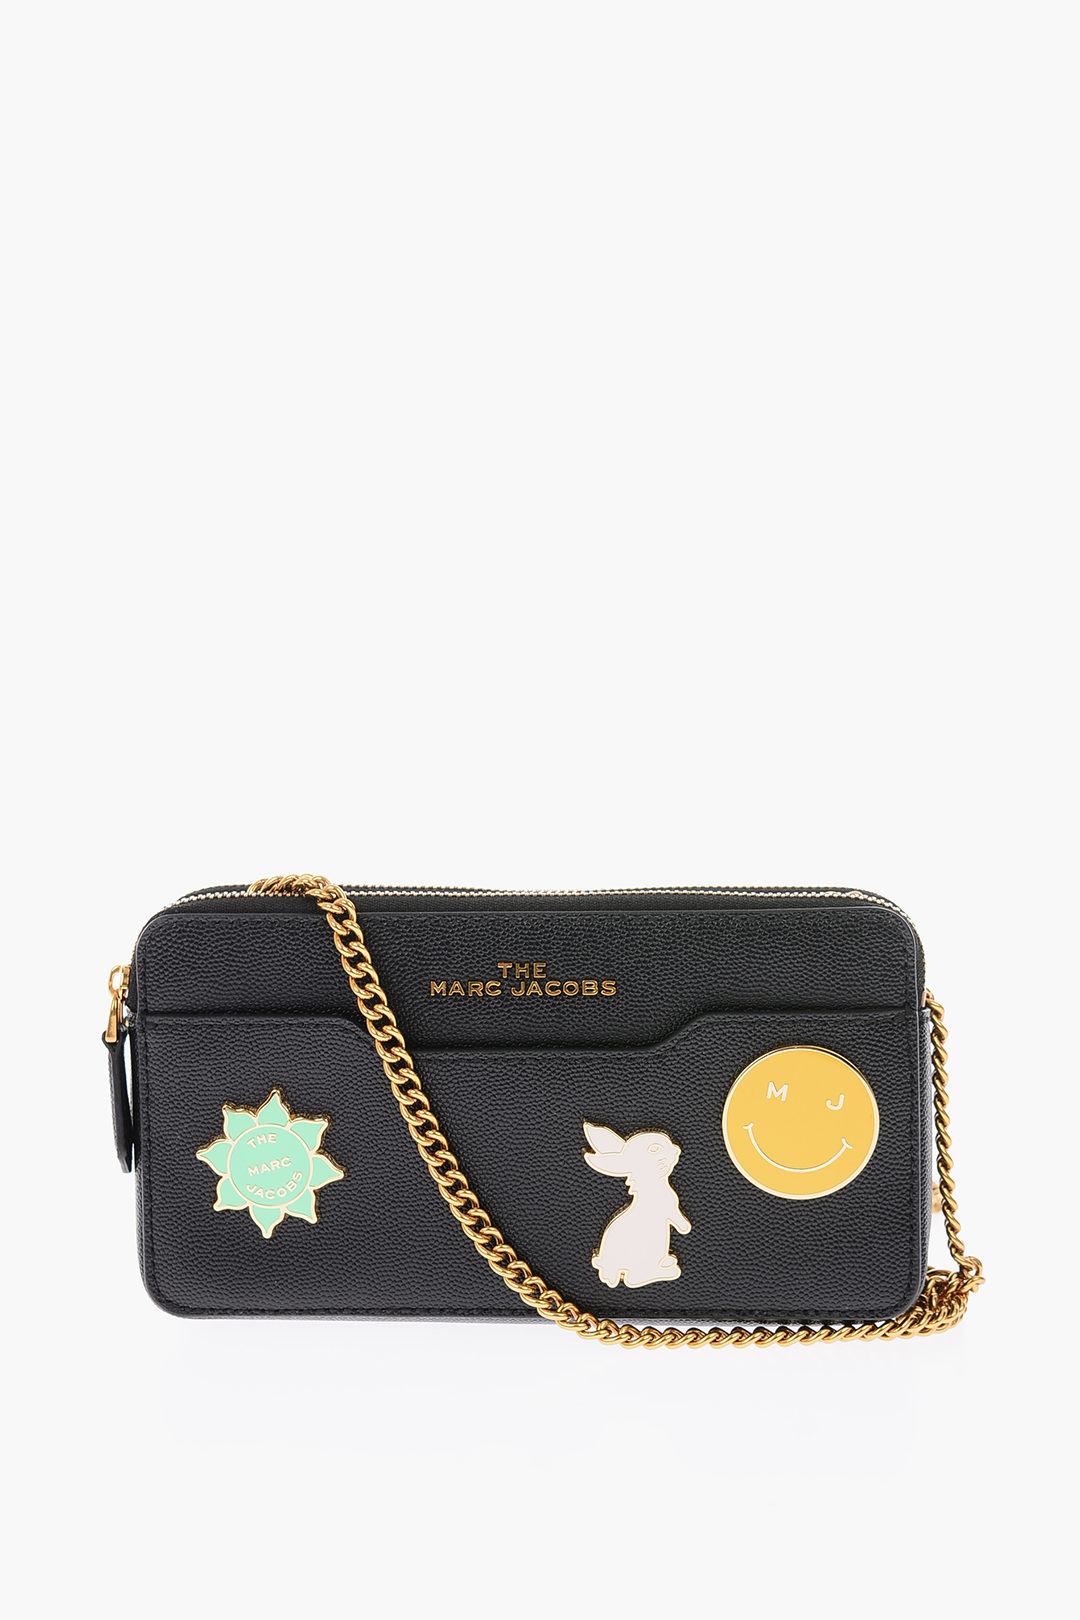 THE MARC JACOBS leather double zip wallet with chain shoulder strap